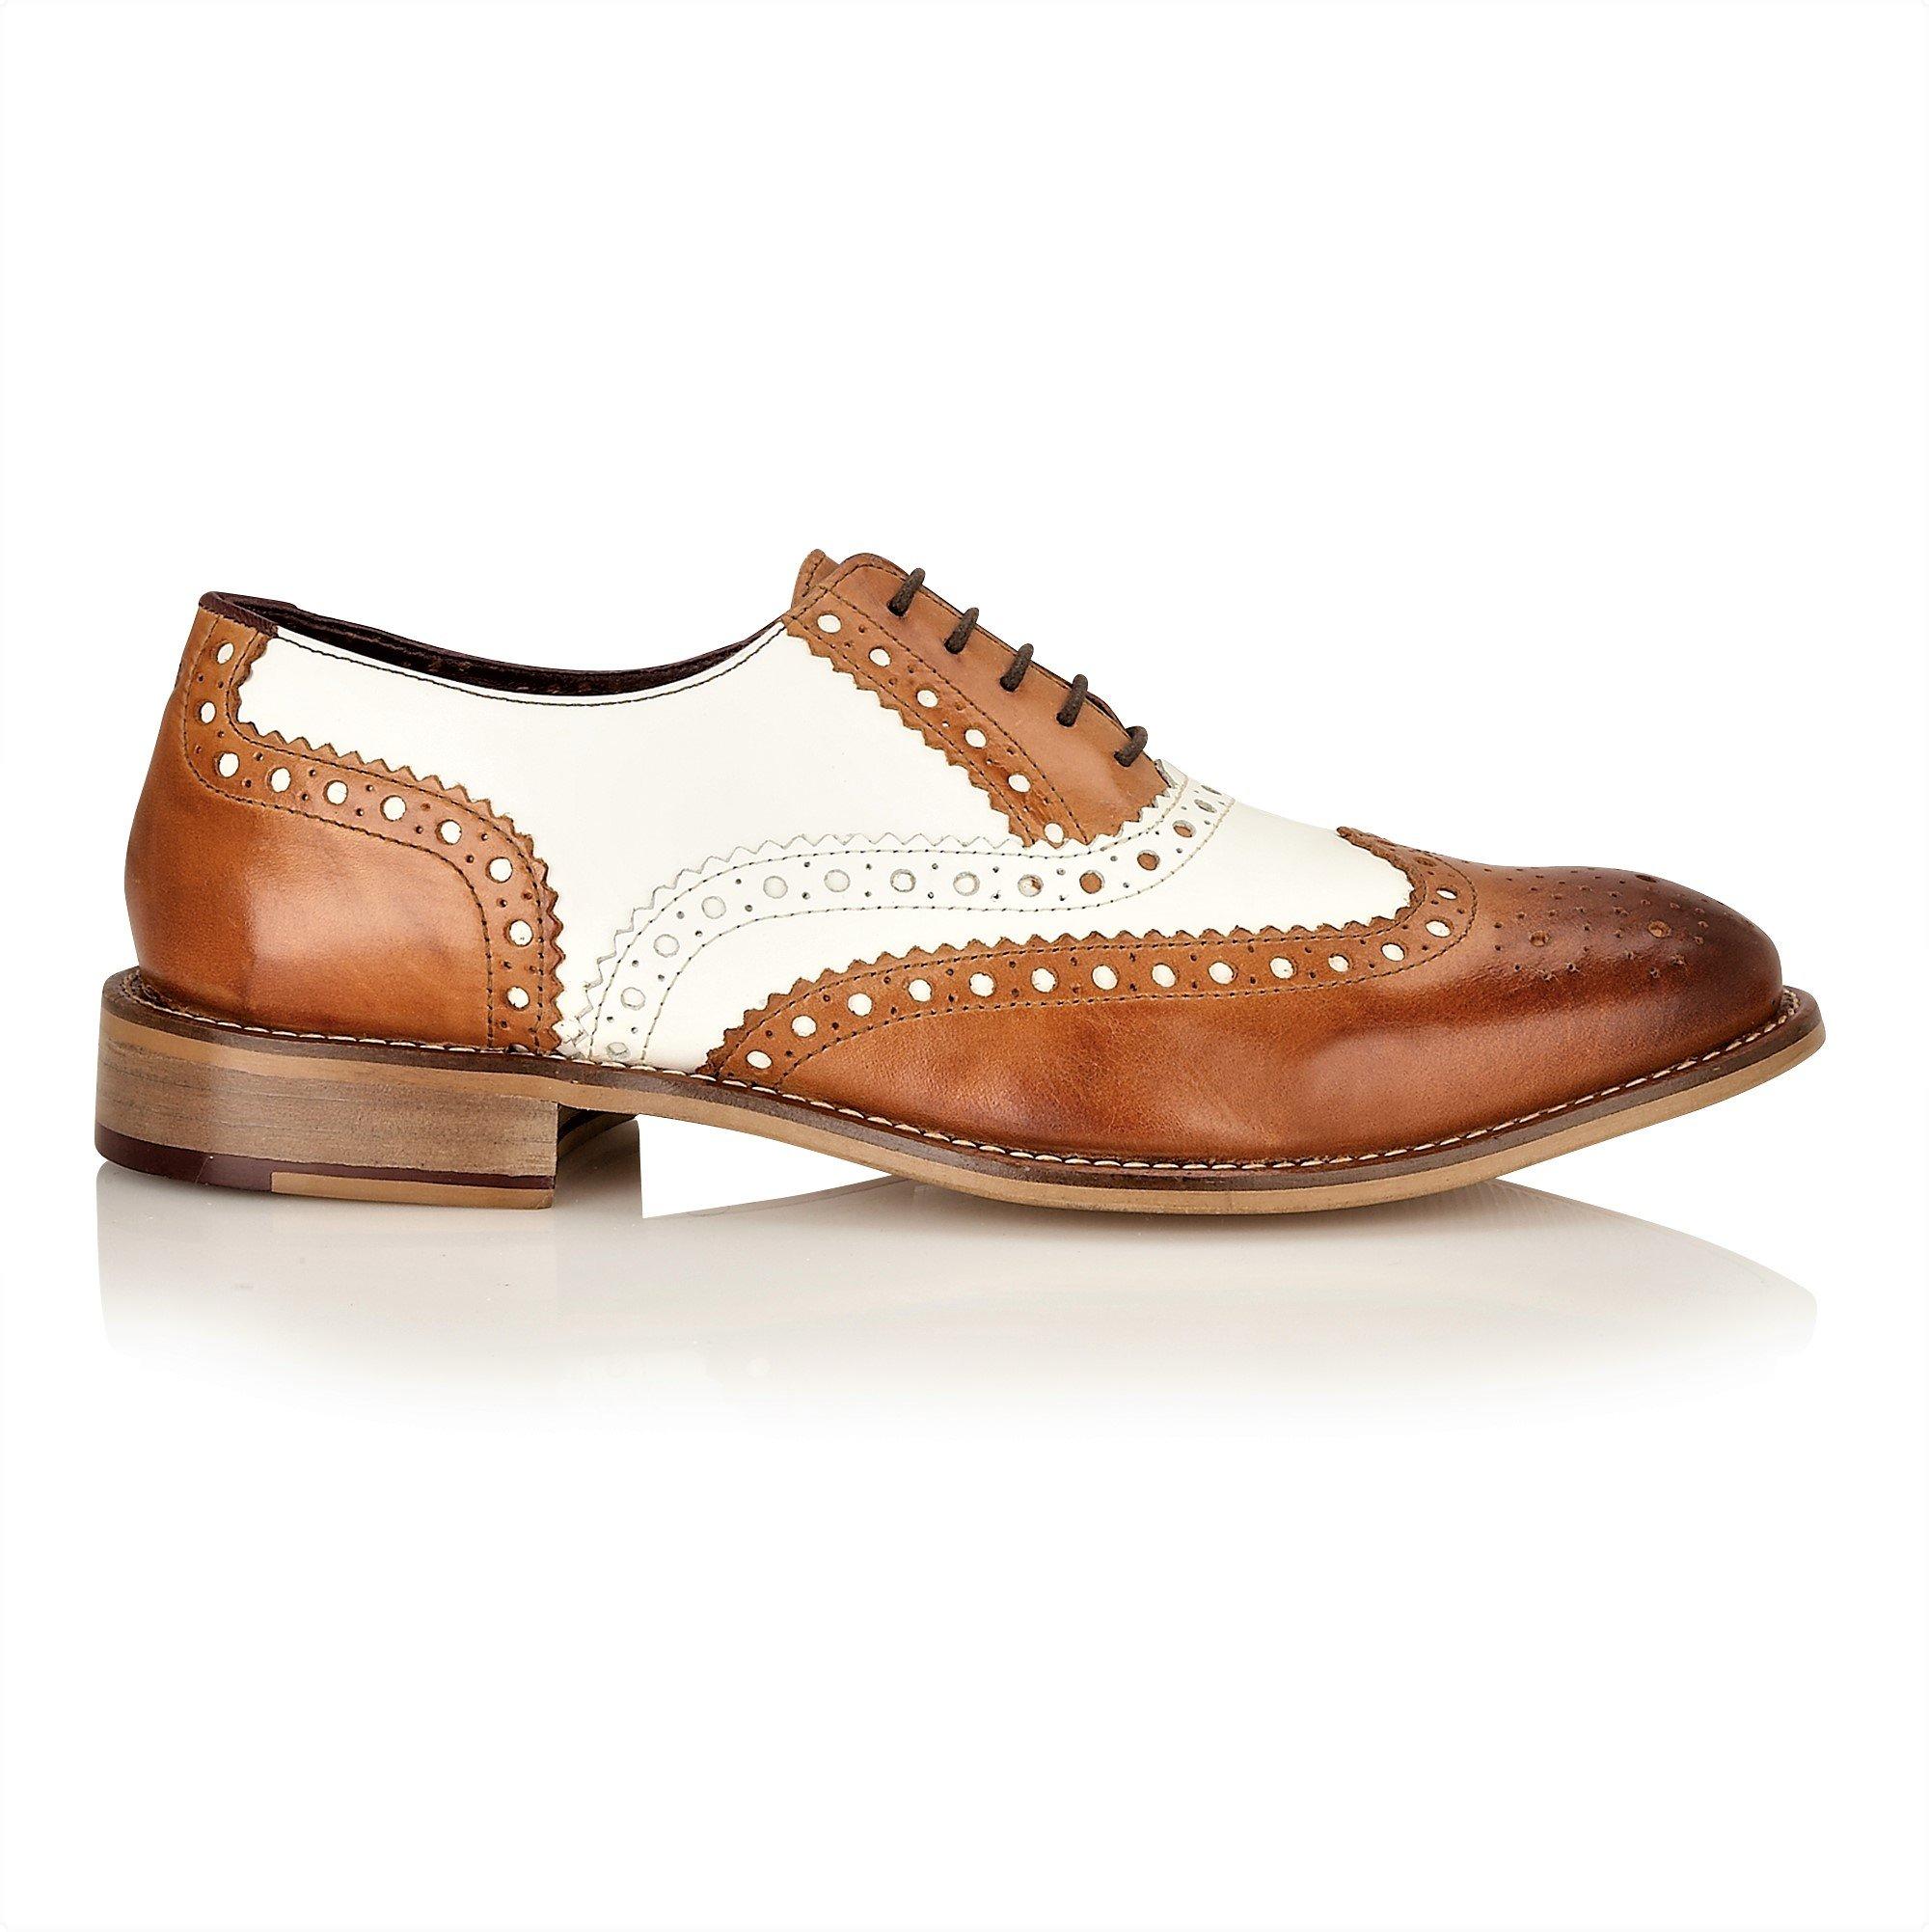 london-brogues-gatsby-tan-and-white